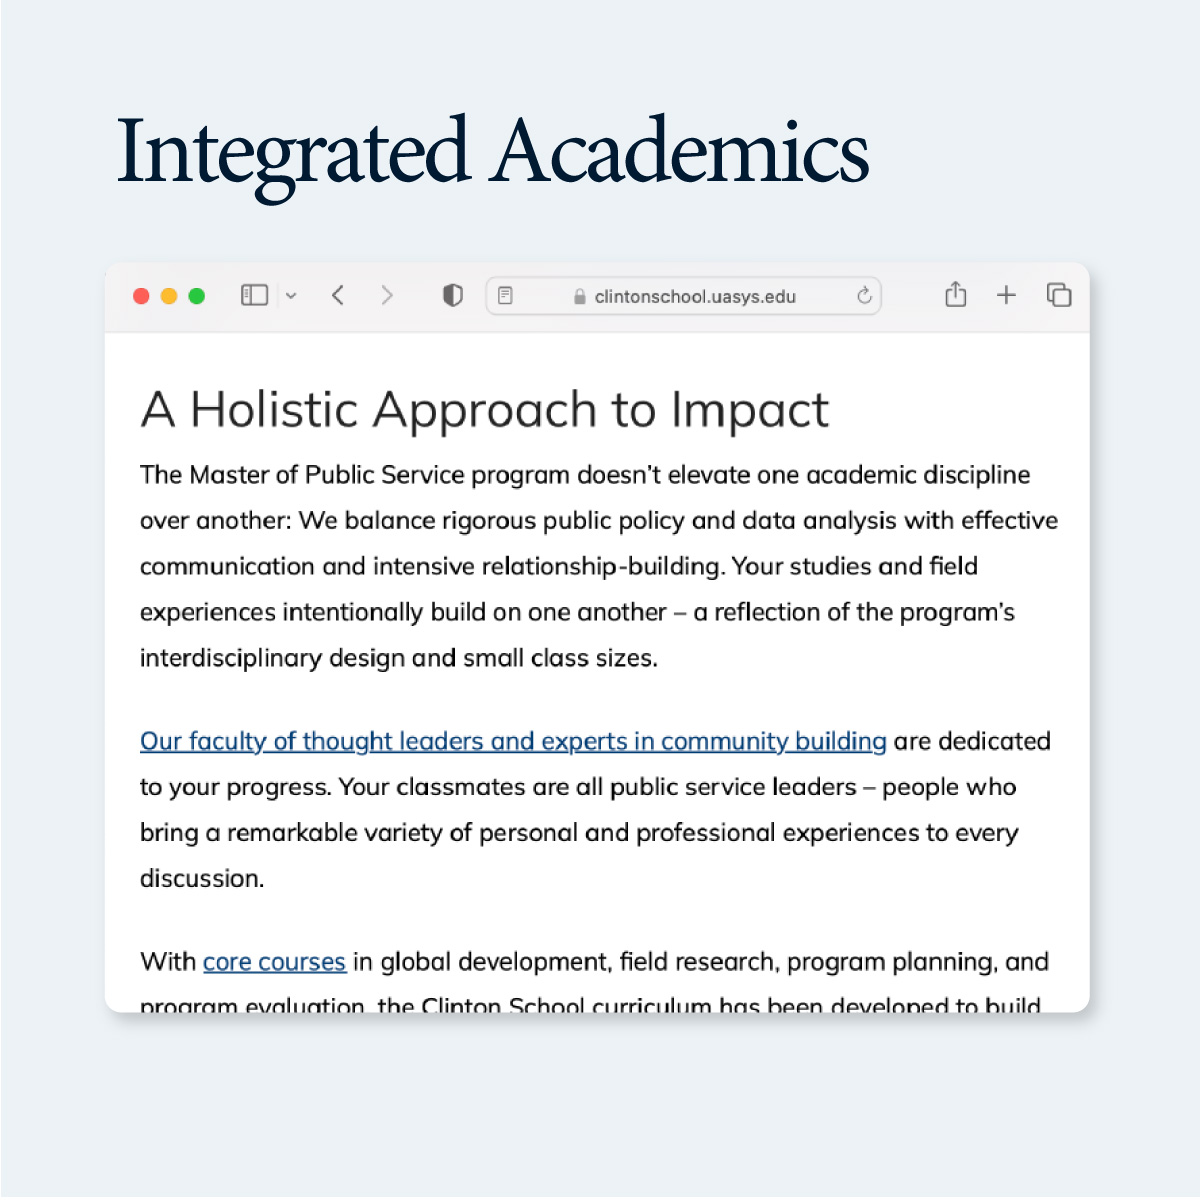 Integrated Academics web page